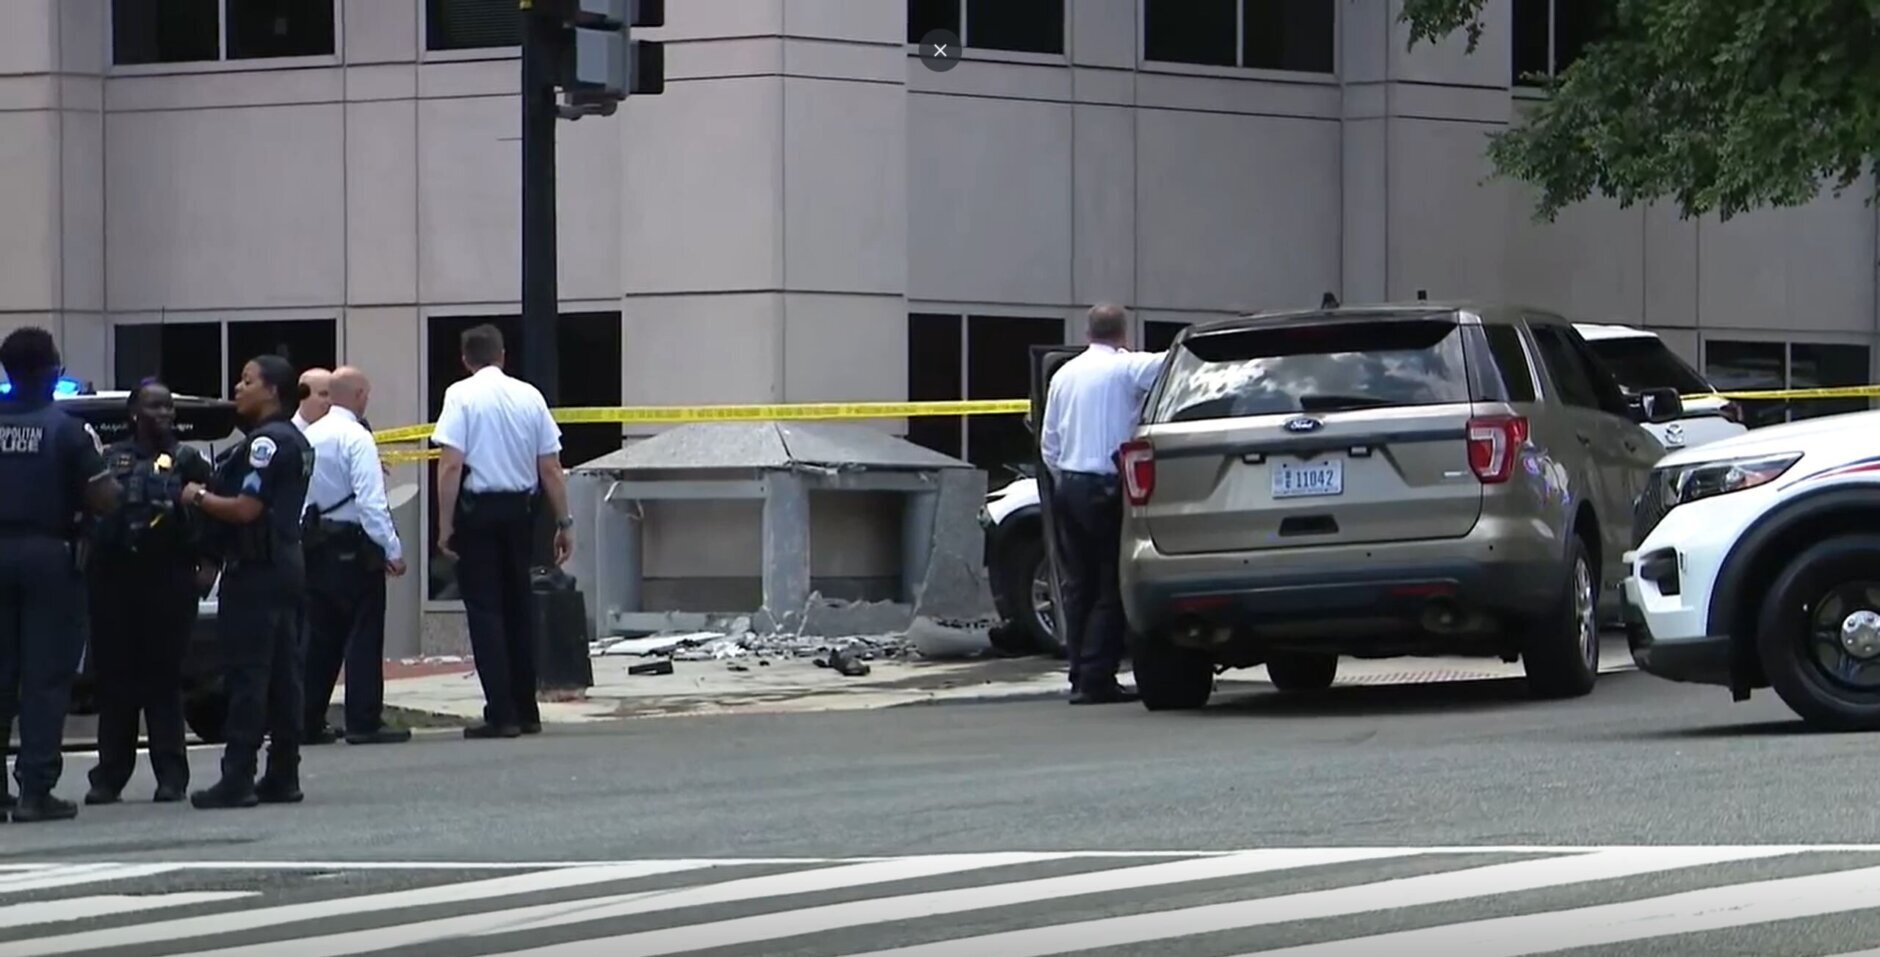 A stolen vehicle crashed into a building at 6th Street and D Street, Northwest on June 3, 2024, according to D.C. police.